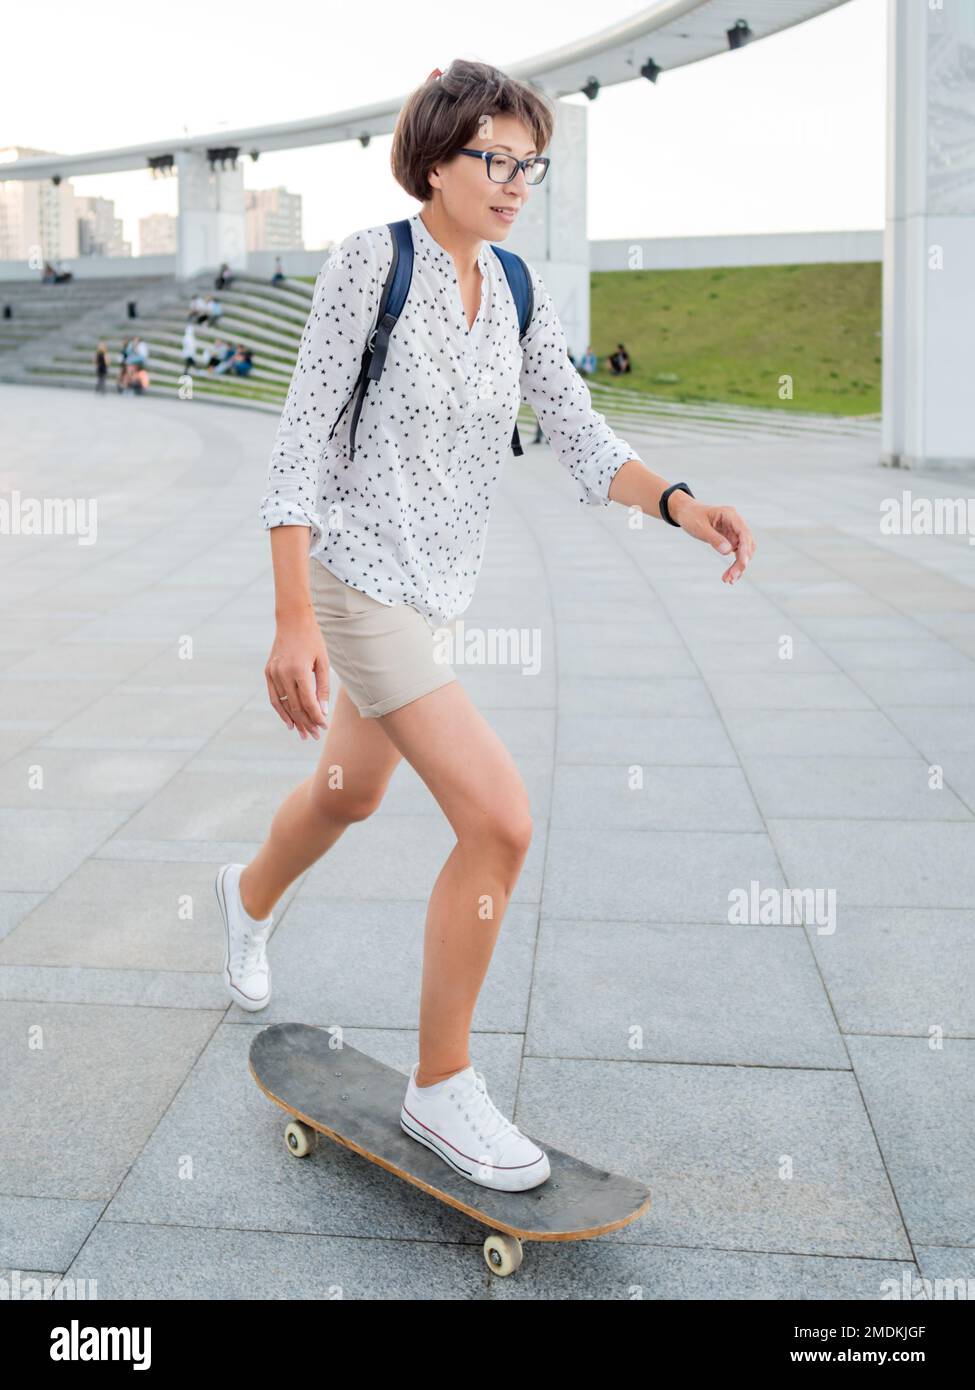 Woman rides skateboard on town square at summer sunset. Summer vibes. Learning new things in adulthood. Millennial learns to skate. Healthy lifestyle. Stock Photo